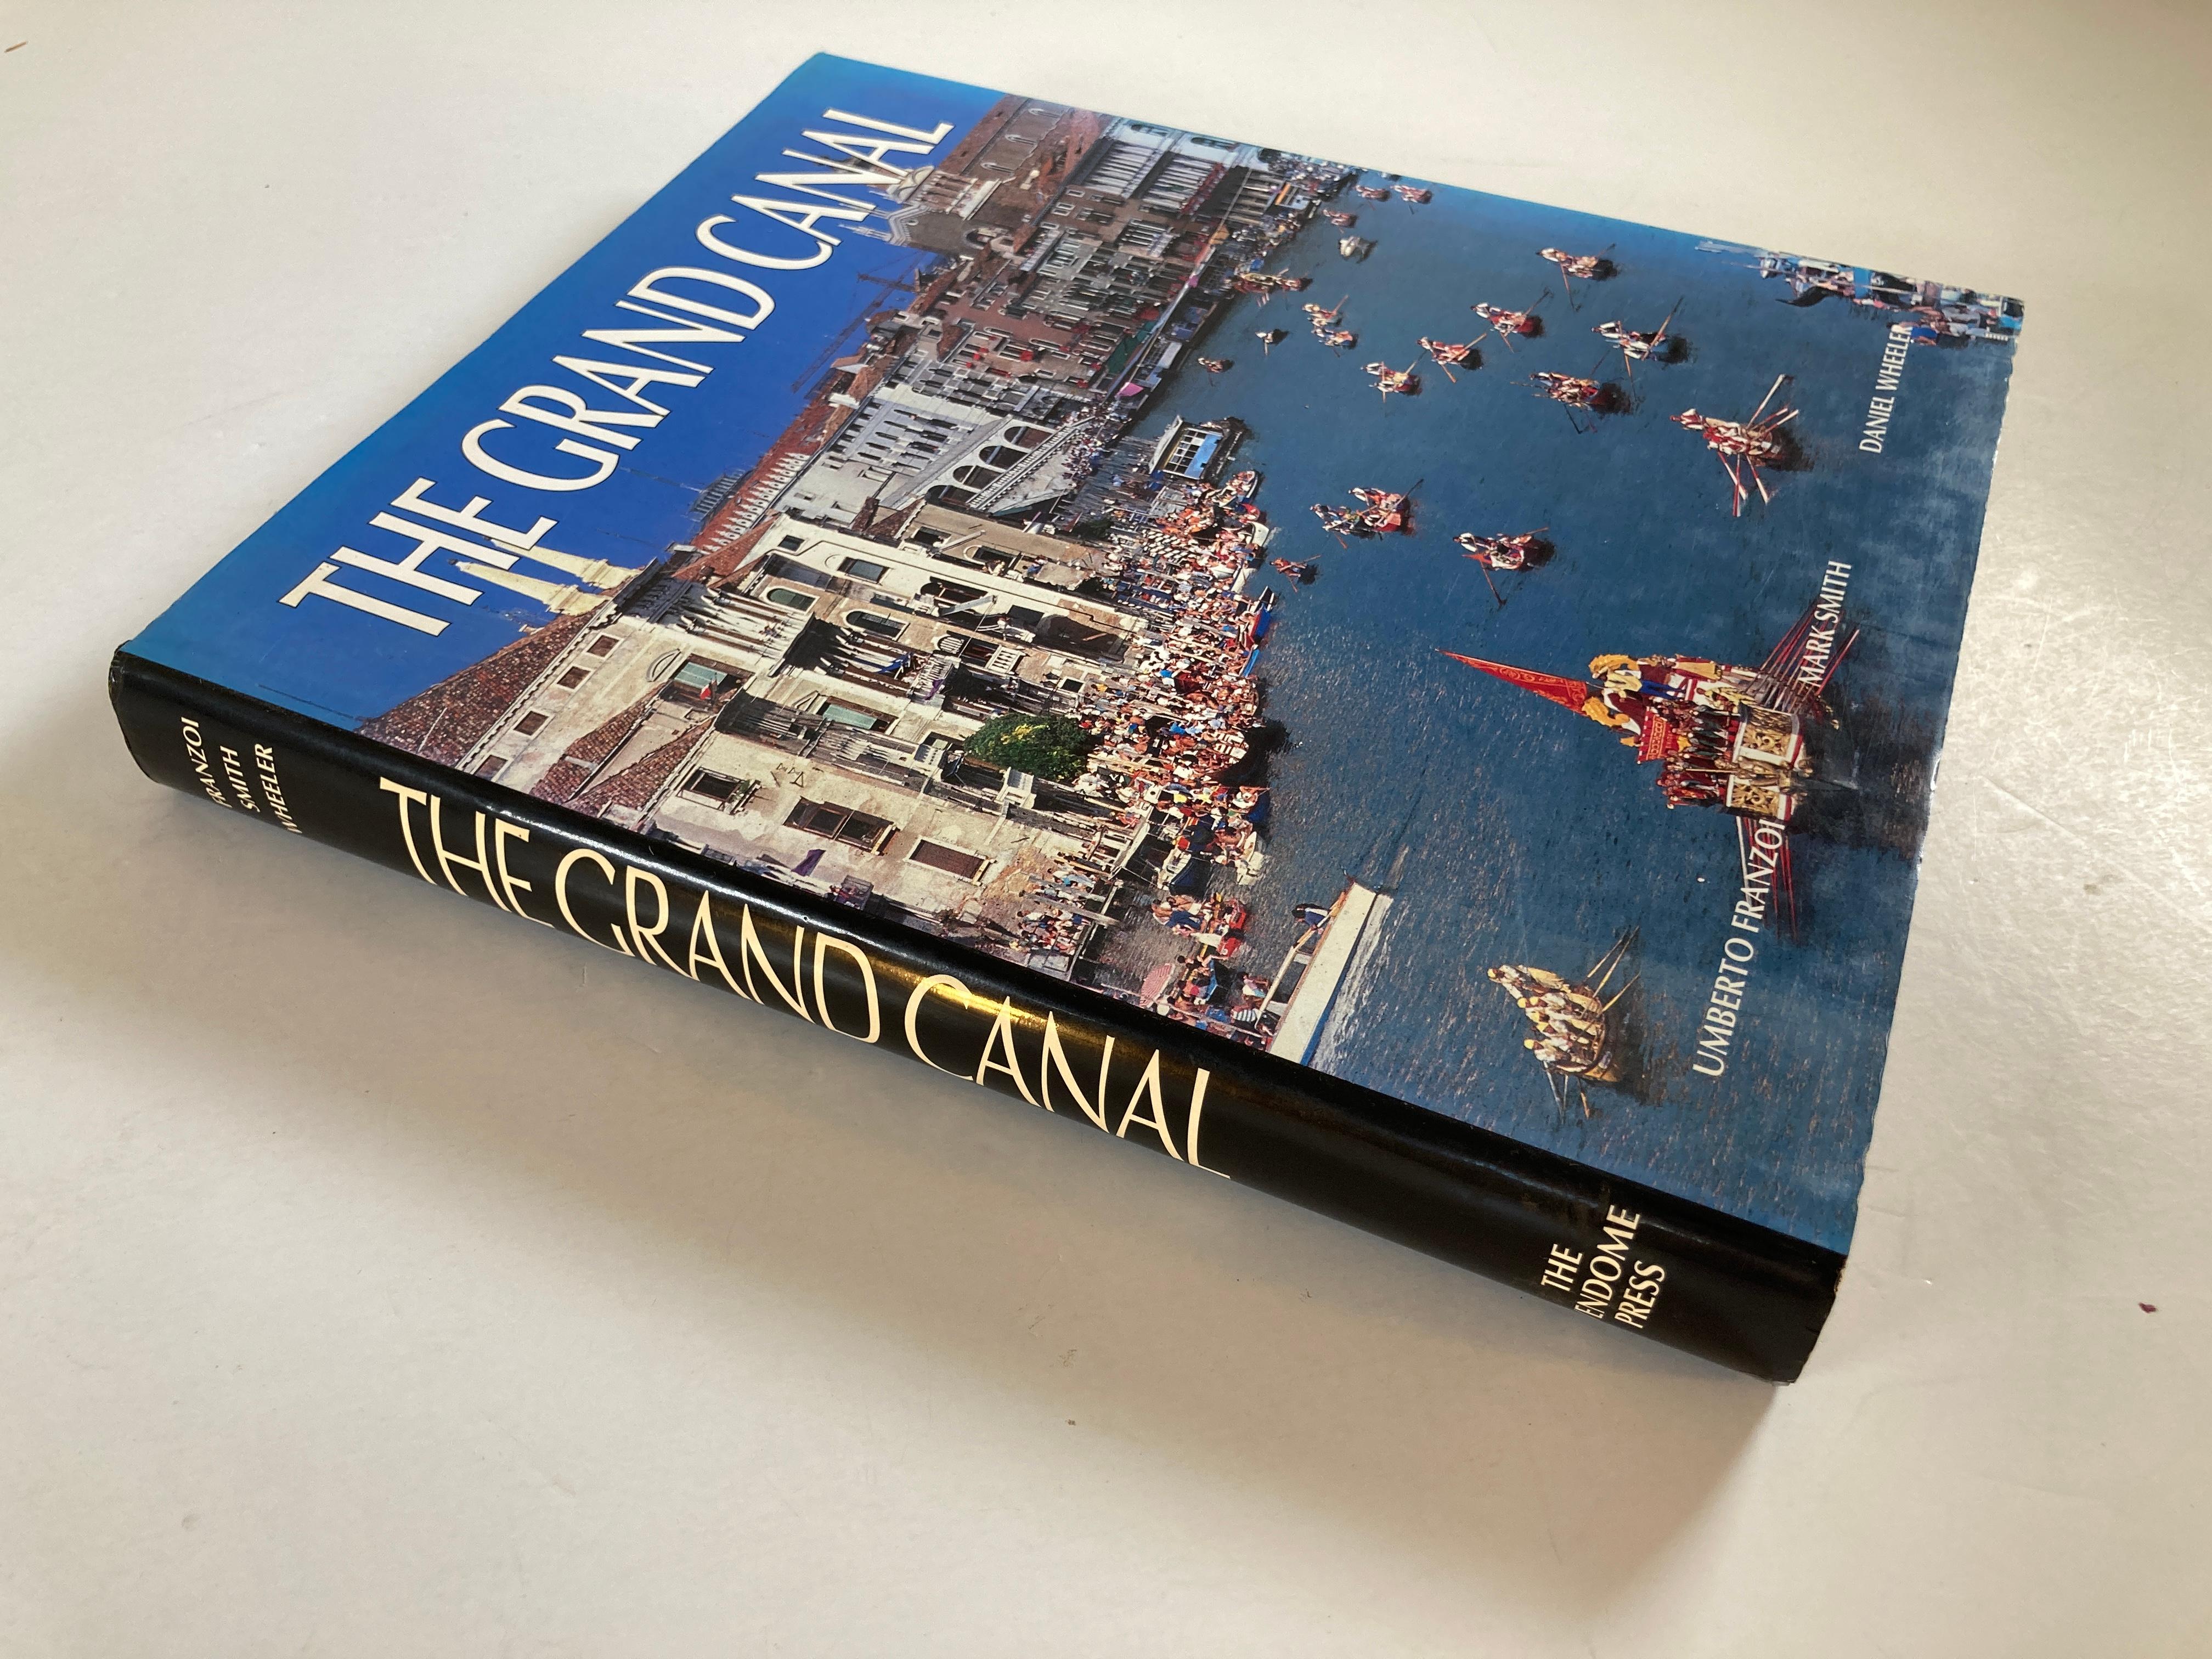 Moorish The Grand Canal by Umberto Franzoi Hardcover Coffee Table Book